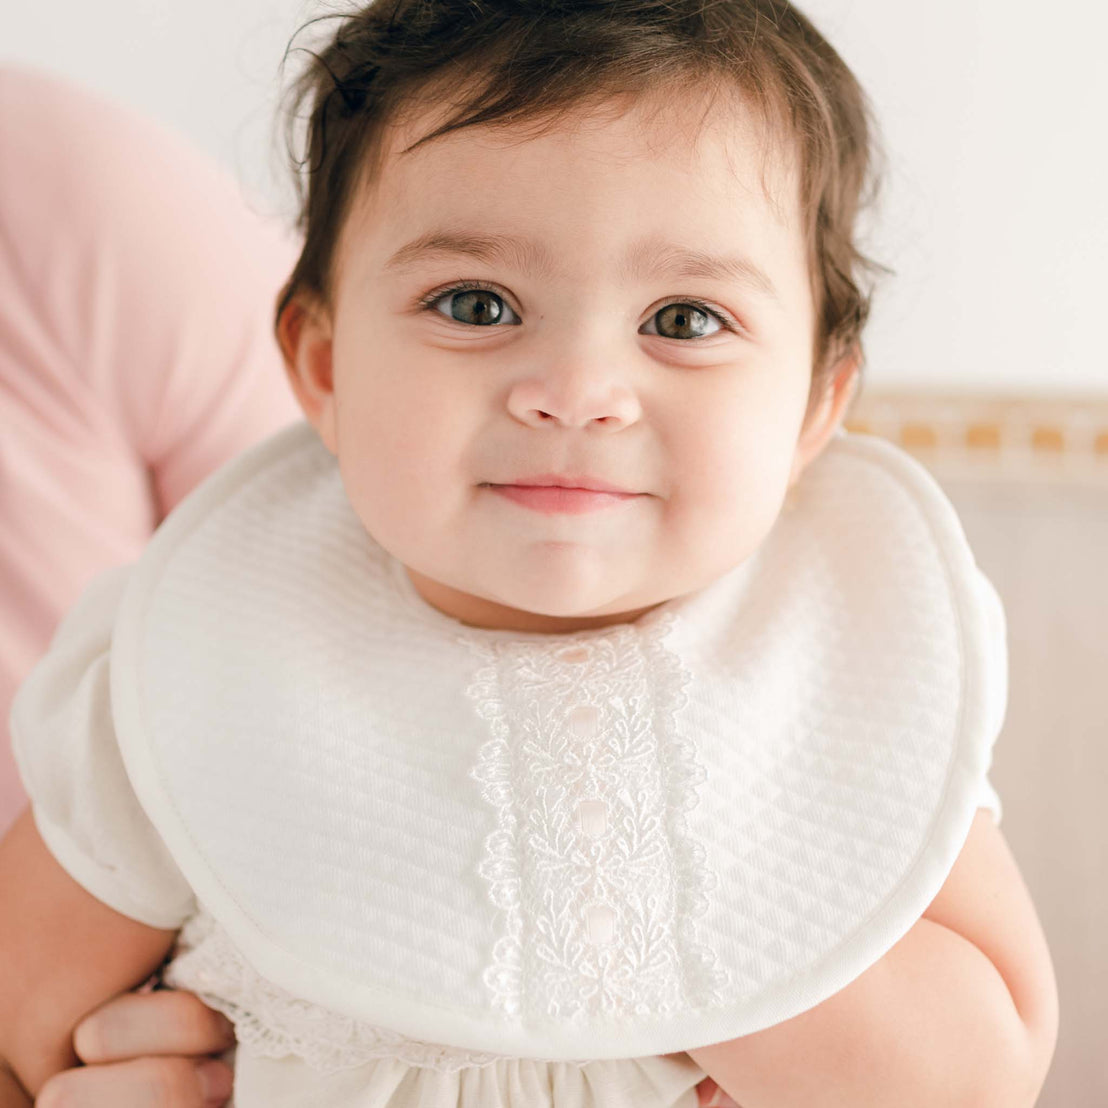 Close-up of a smiling newborn wearing an Emma Bib, looking at the camera with wide eyes.